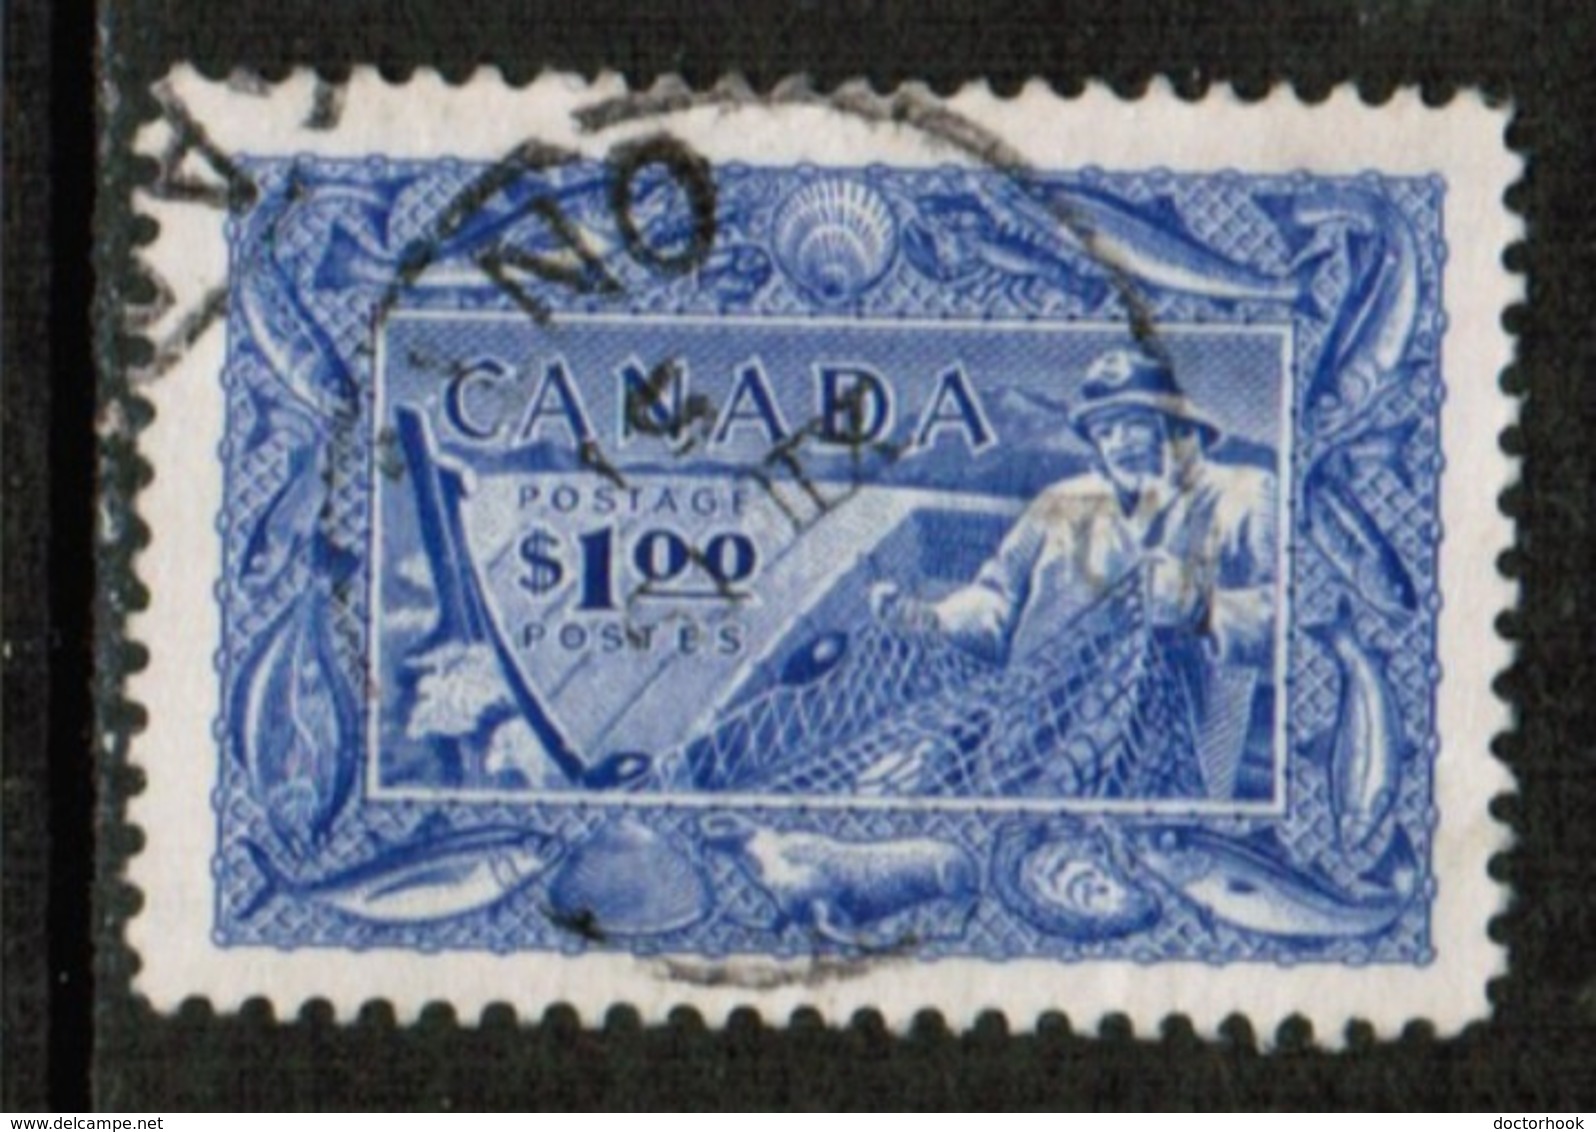 CANADA  Scott # 302 VF USED (Stamp Scan # 533) - Used Stamps